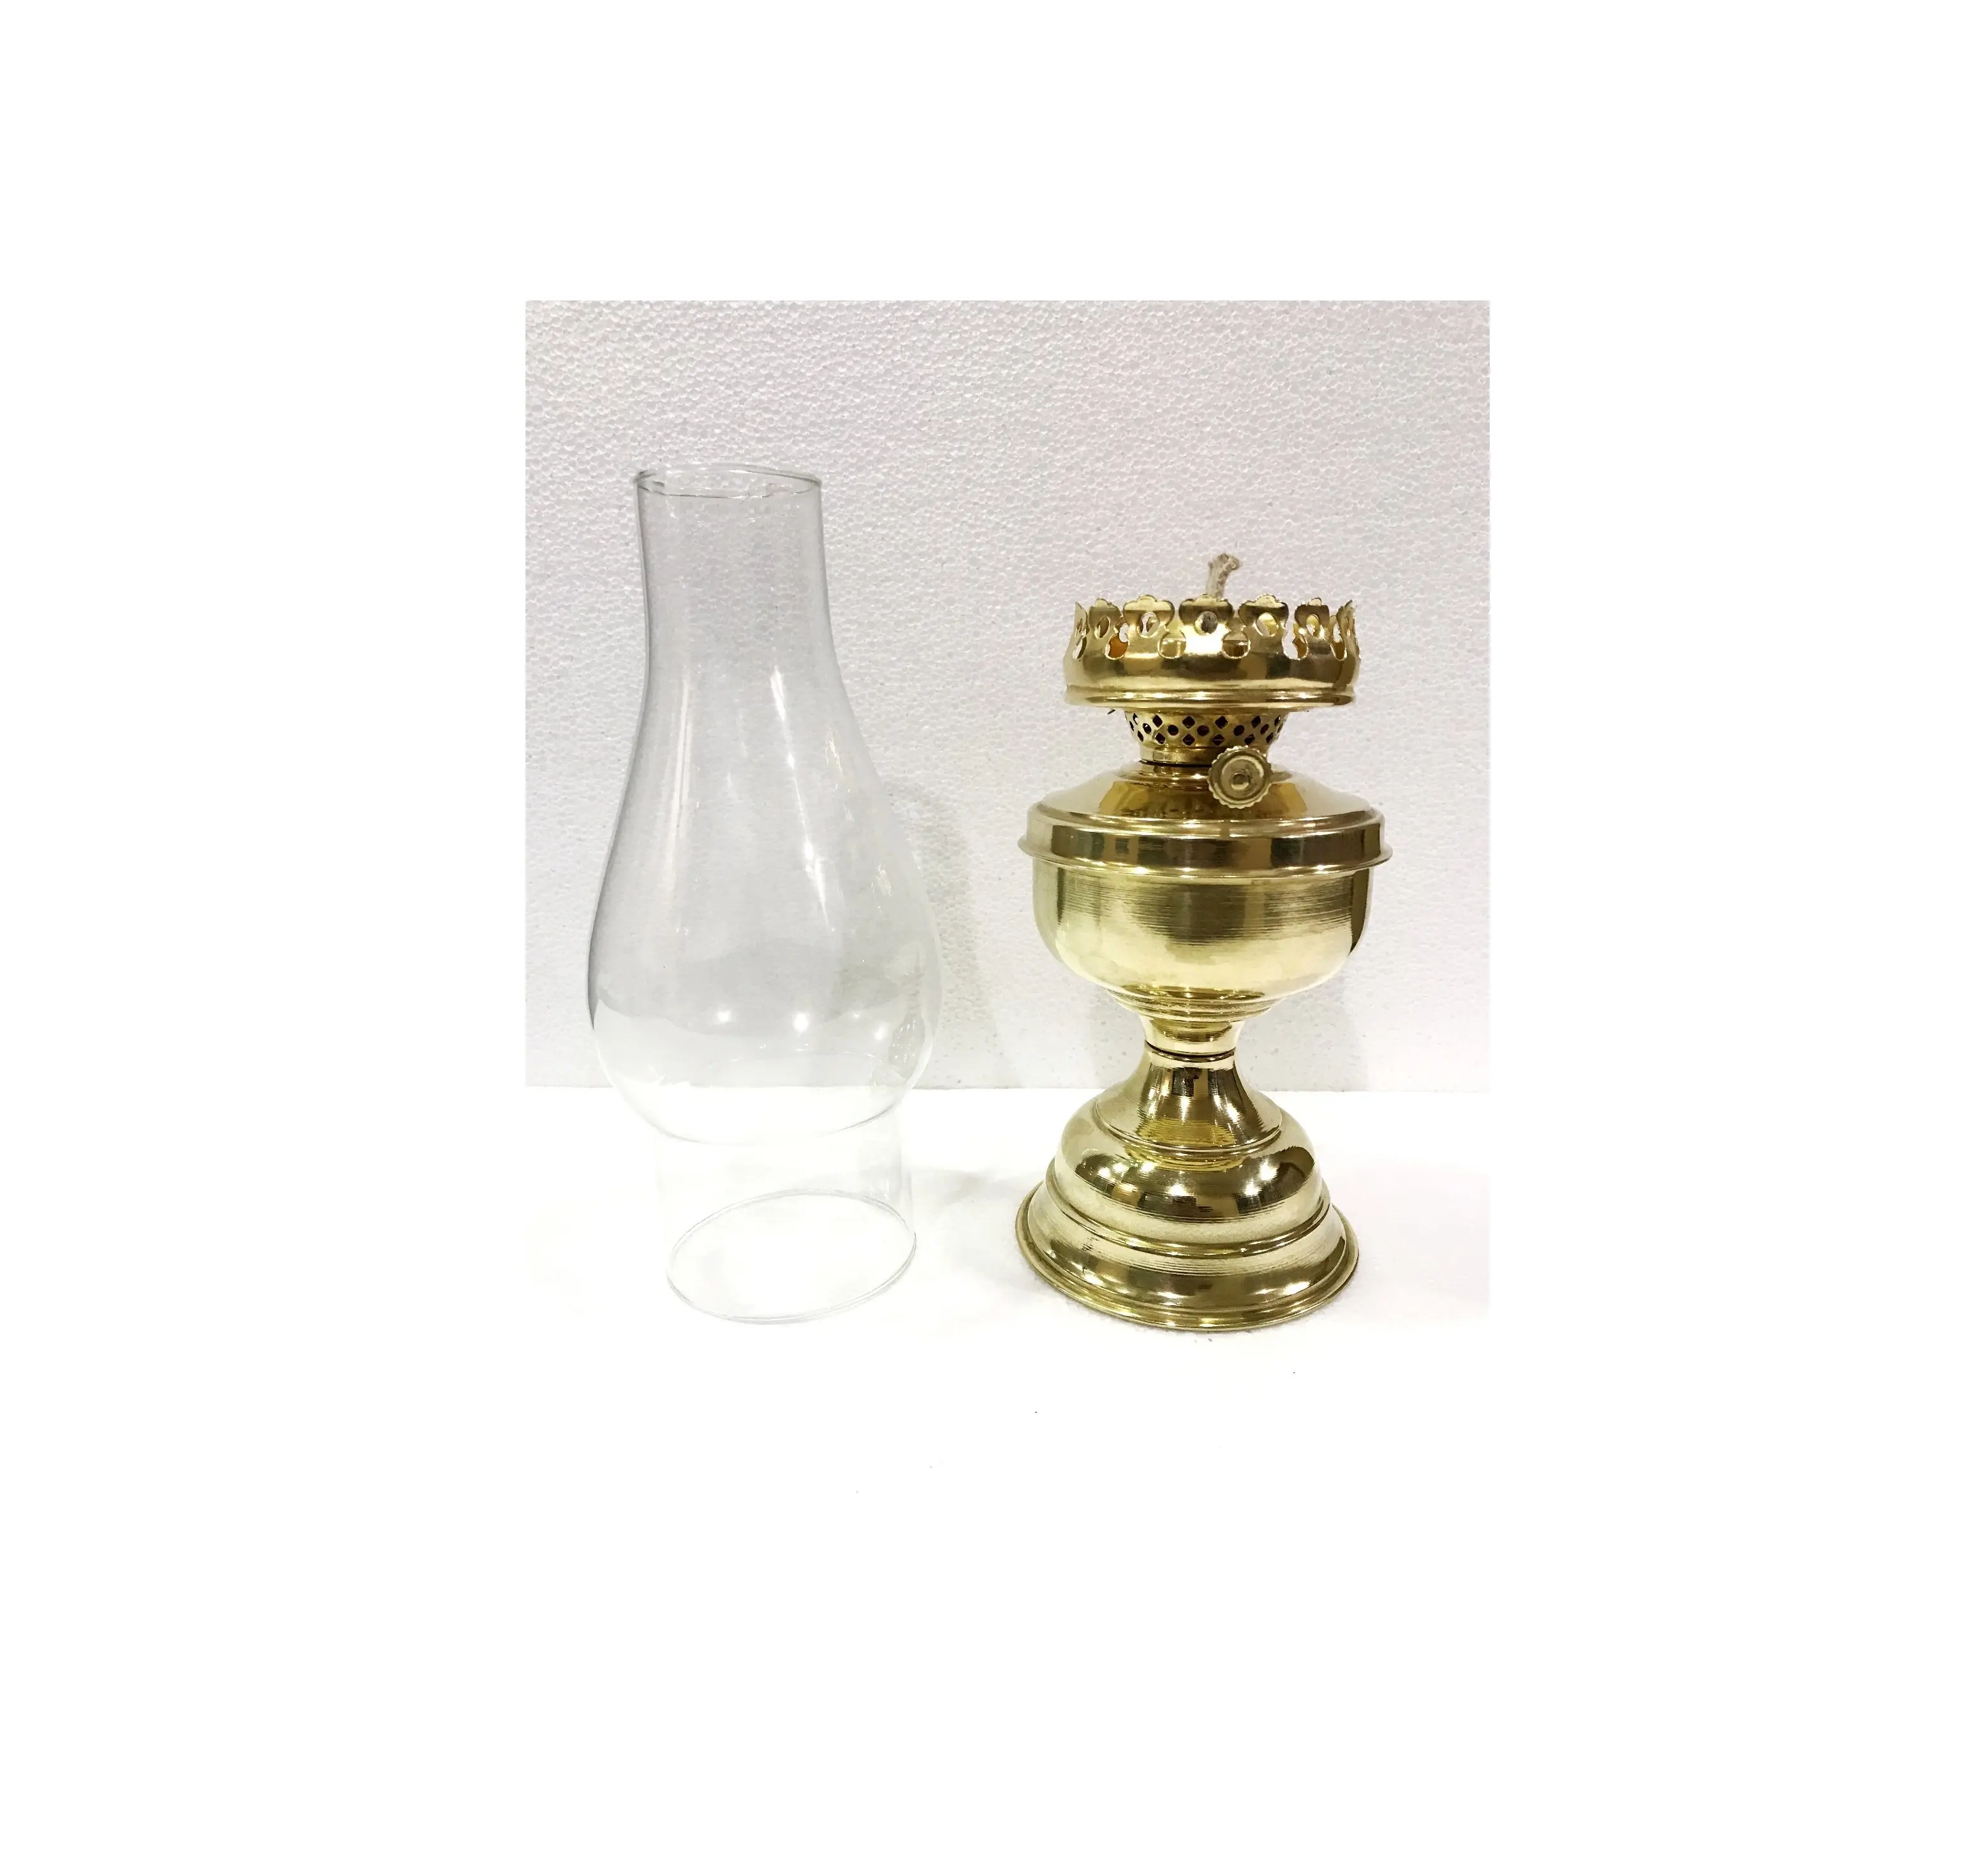 High Selling Metal Kerosene Oil Lamp In Polished Finished For Decoration And Garden Use In wholesale Prices With Export Quality